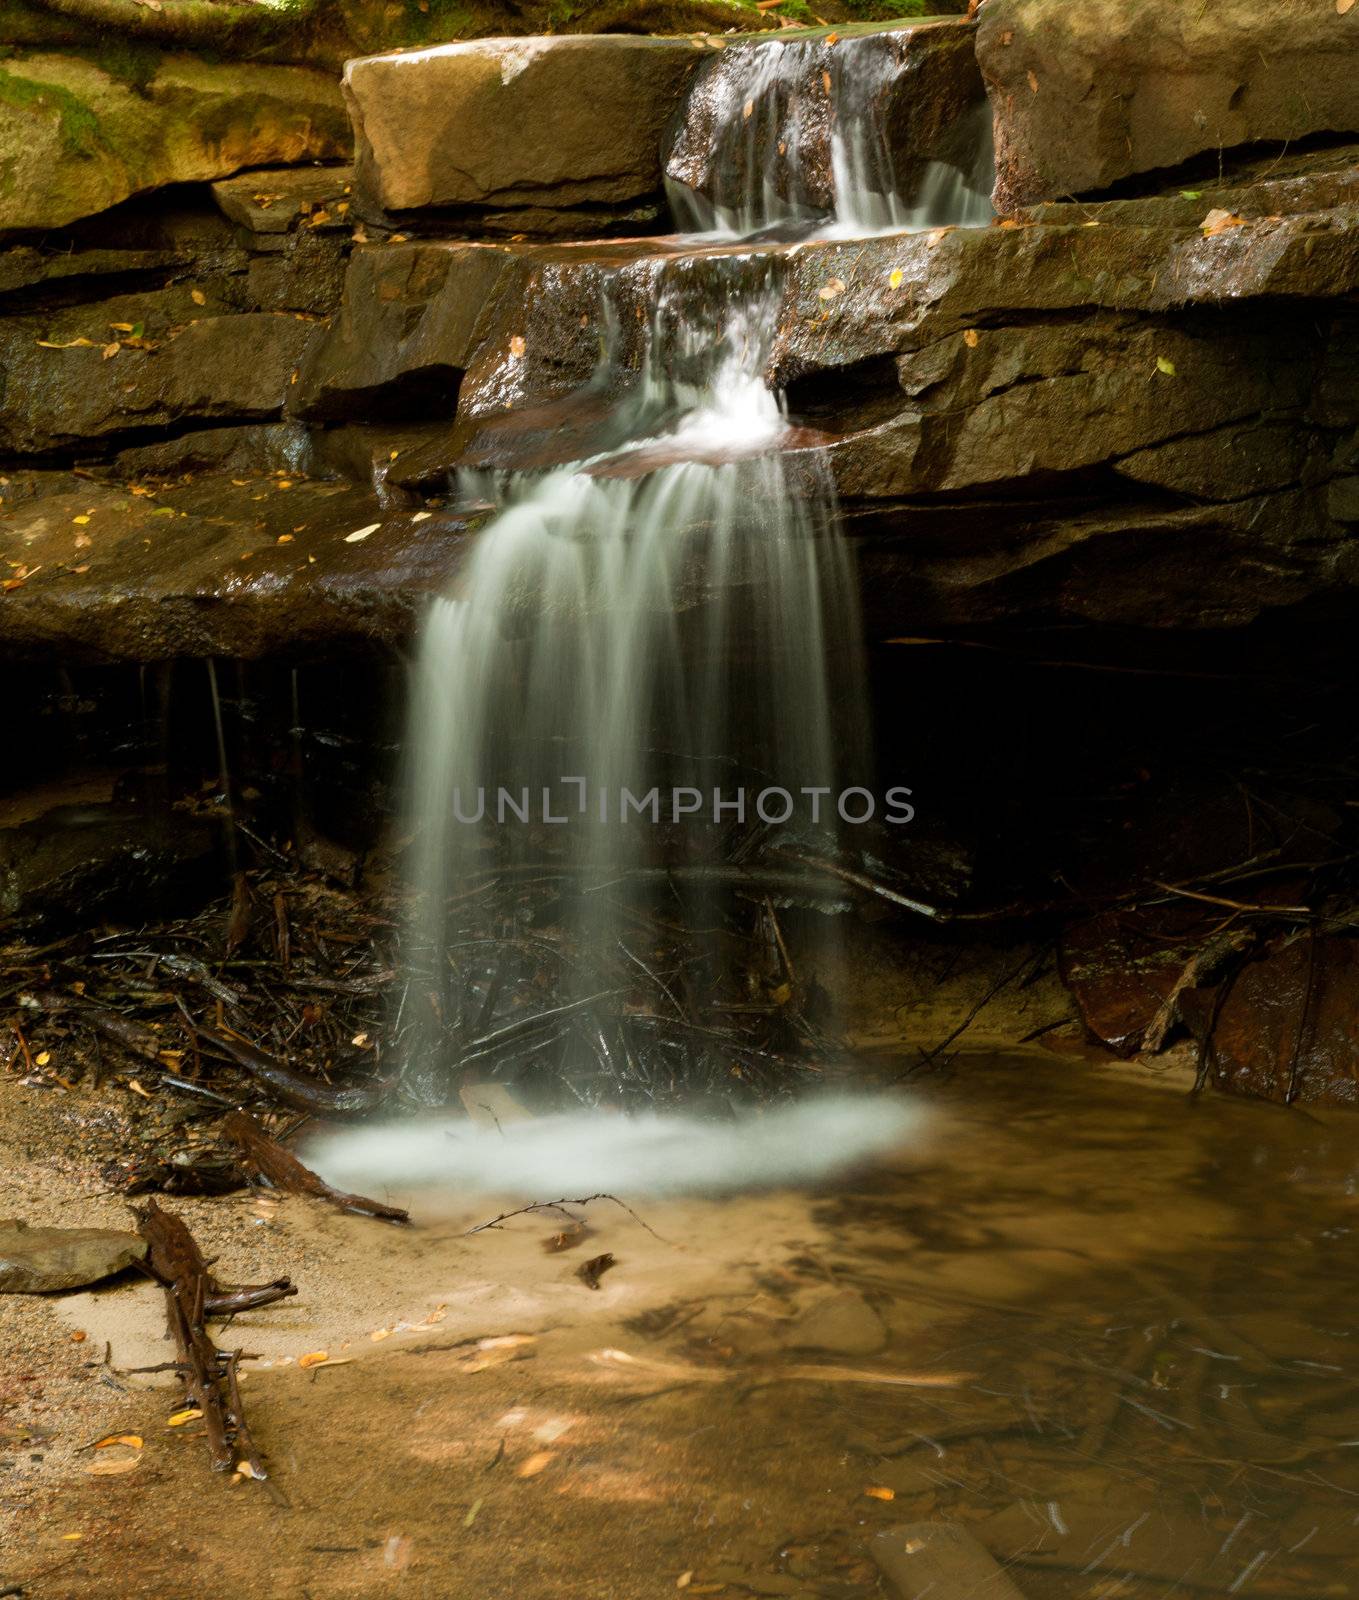 Swallow Falls Maryland by steheap